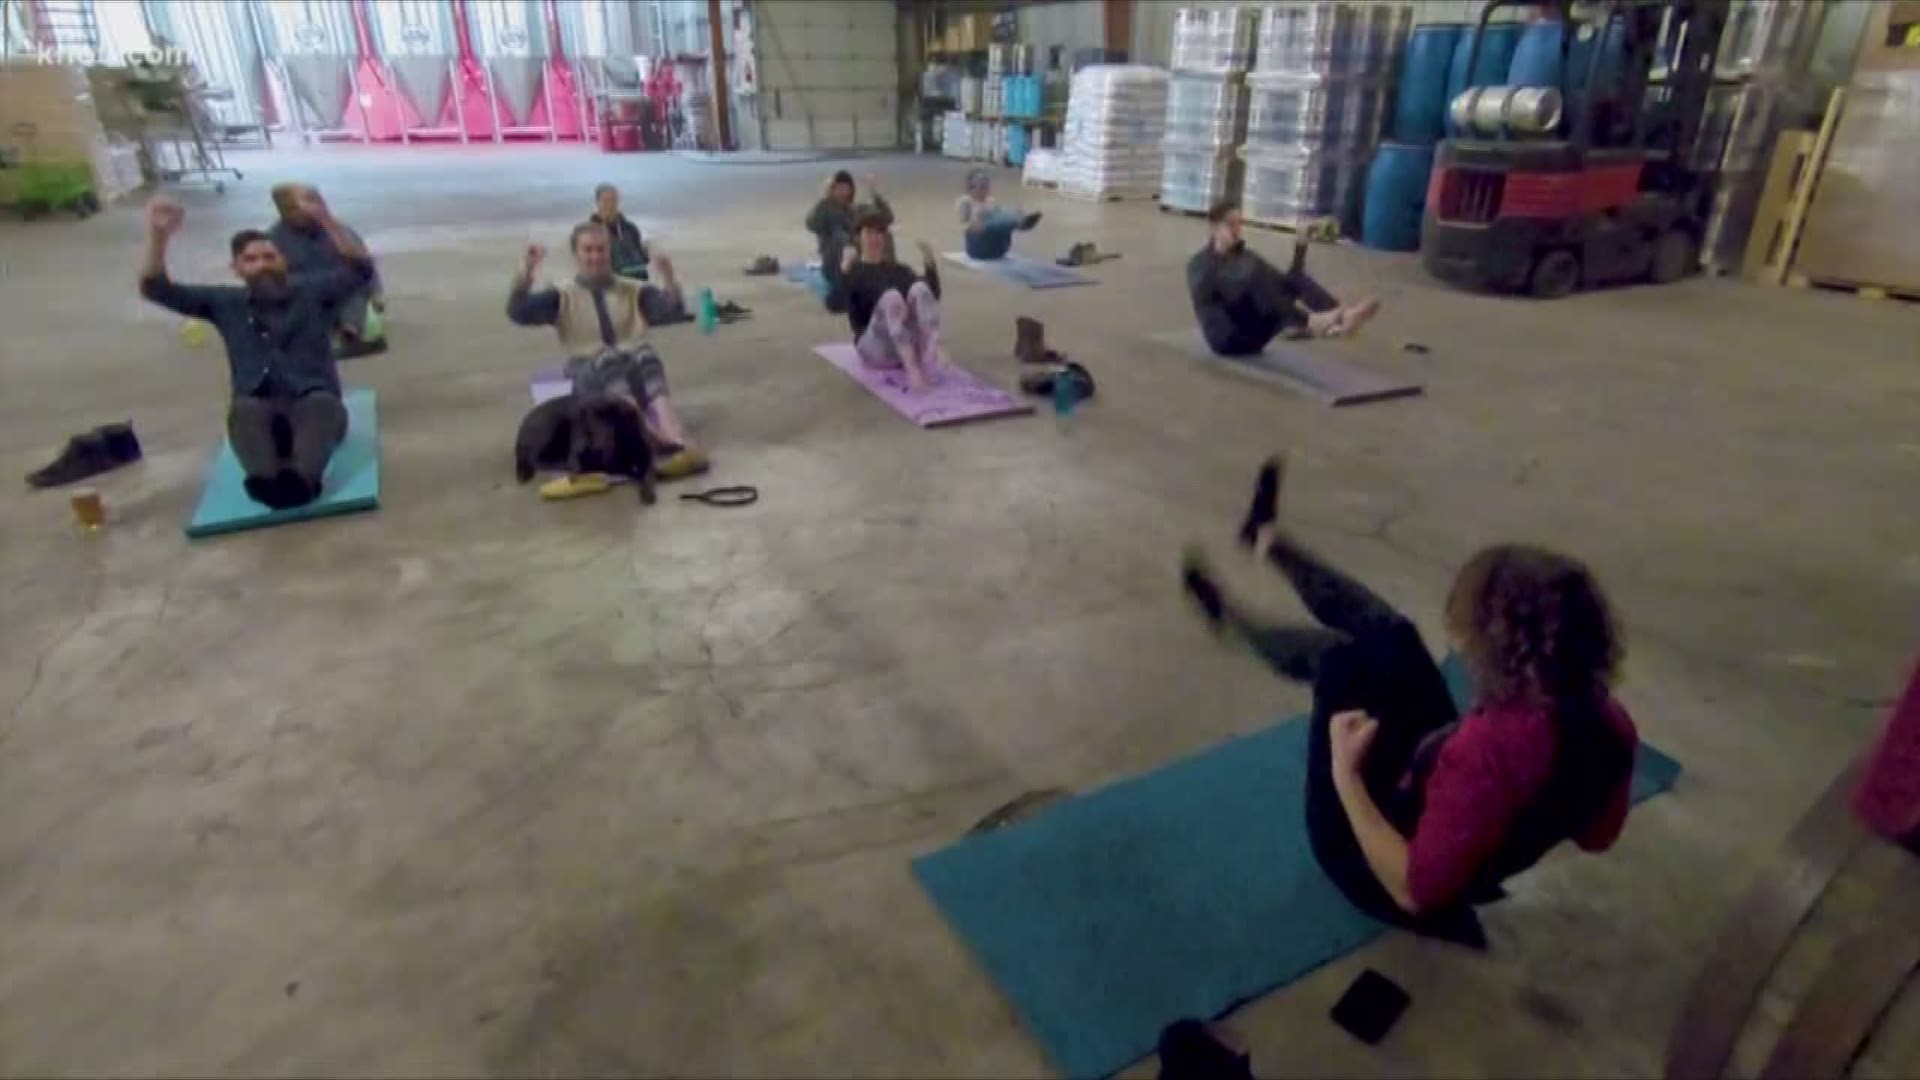 There’s a different kind of yoga in Houston that throws a wrench in the “zen” one would expect: Rage Yoga.